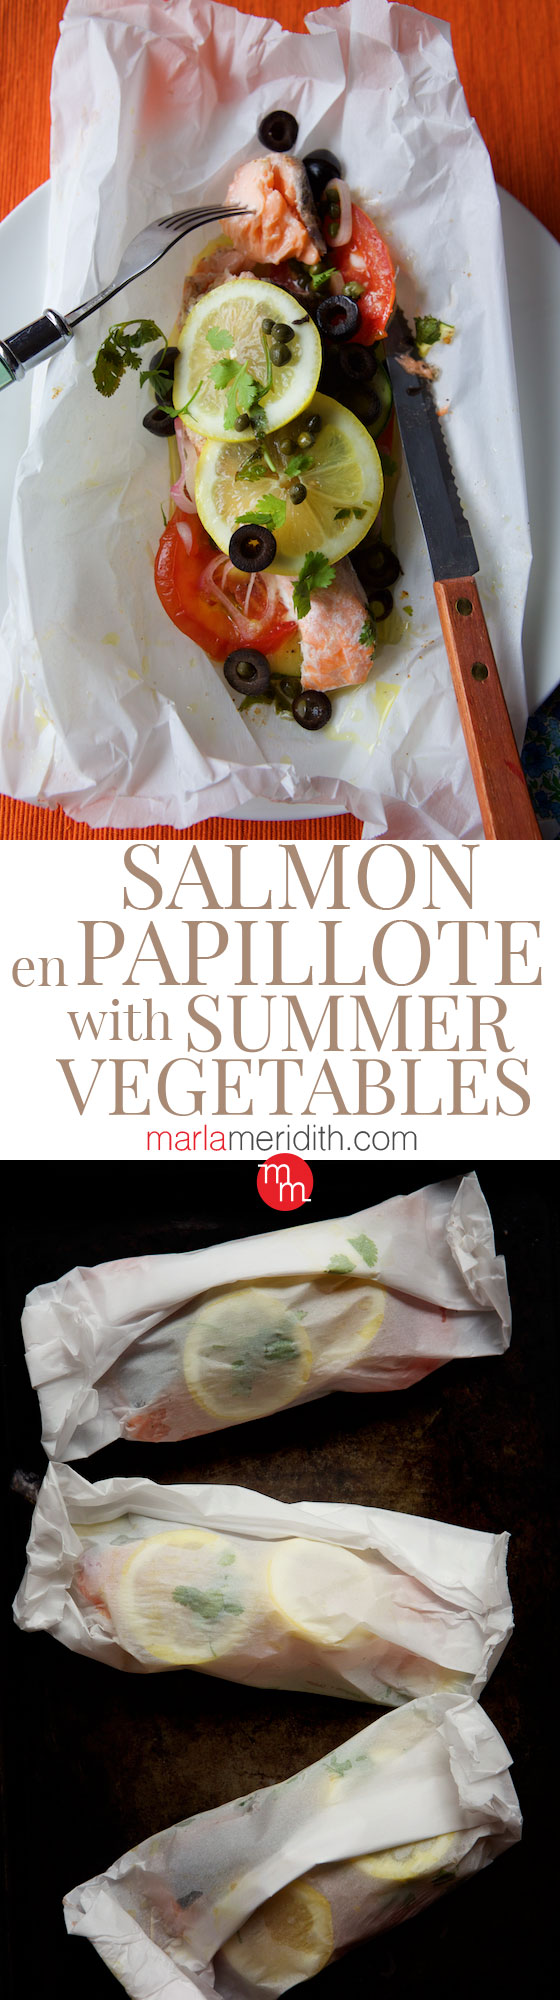 Salmon en Papillote (in parchment paper) with Summer Vegetables. This healthy recipe is bursting with flavor! MarlaMeridith.com ( @marlameridith )